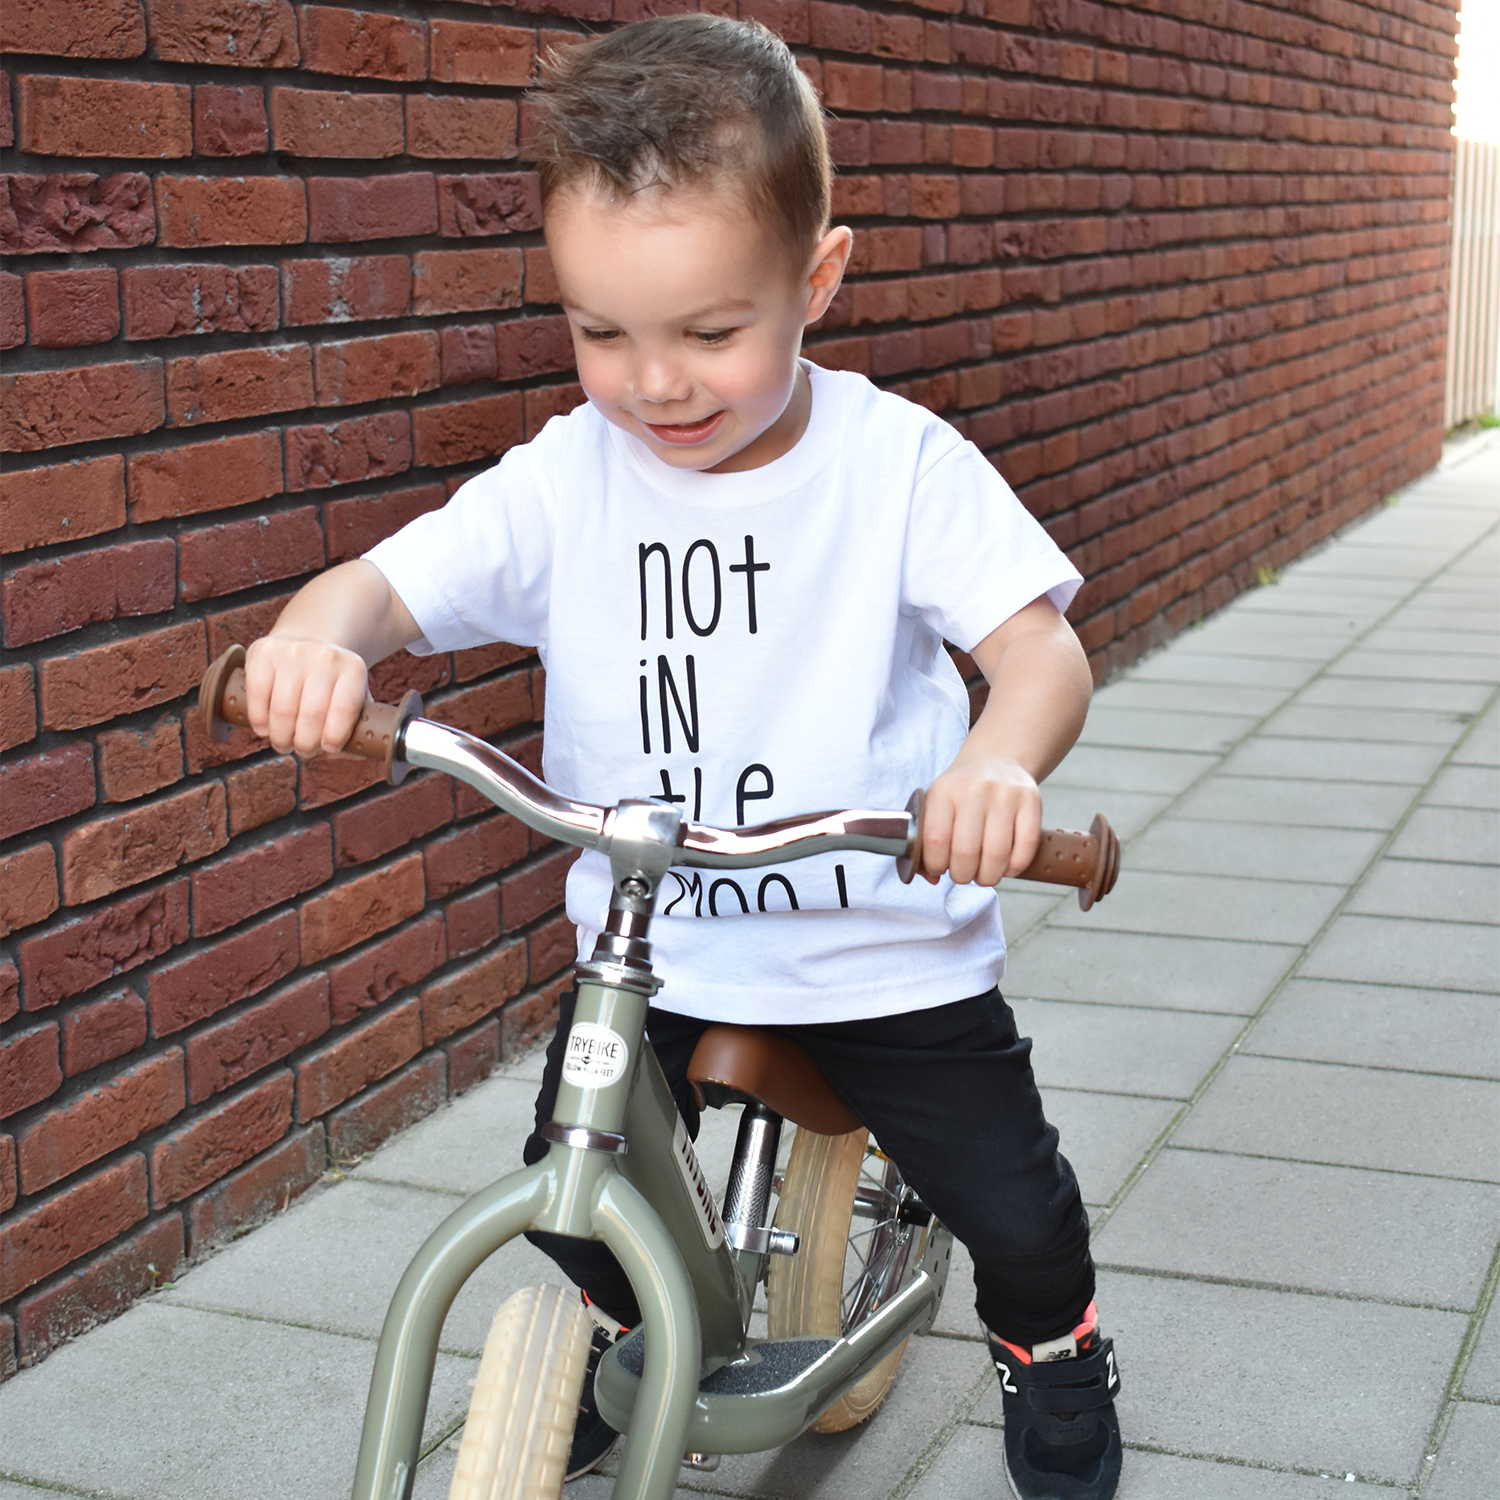 'Not in the mood' kids shortsleeve shirt